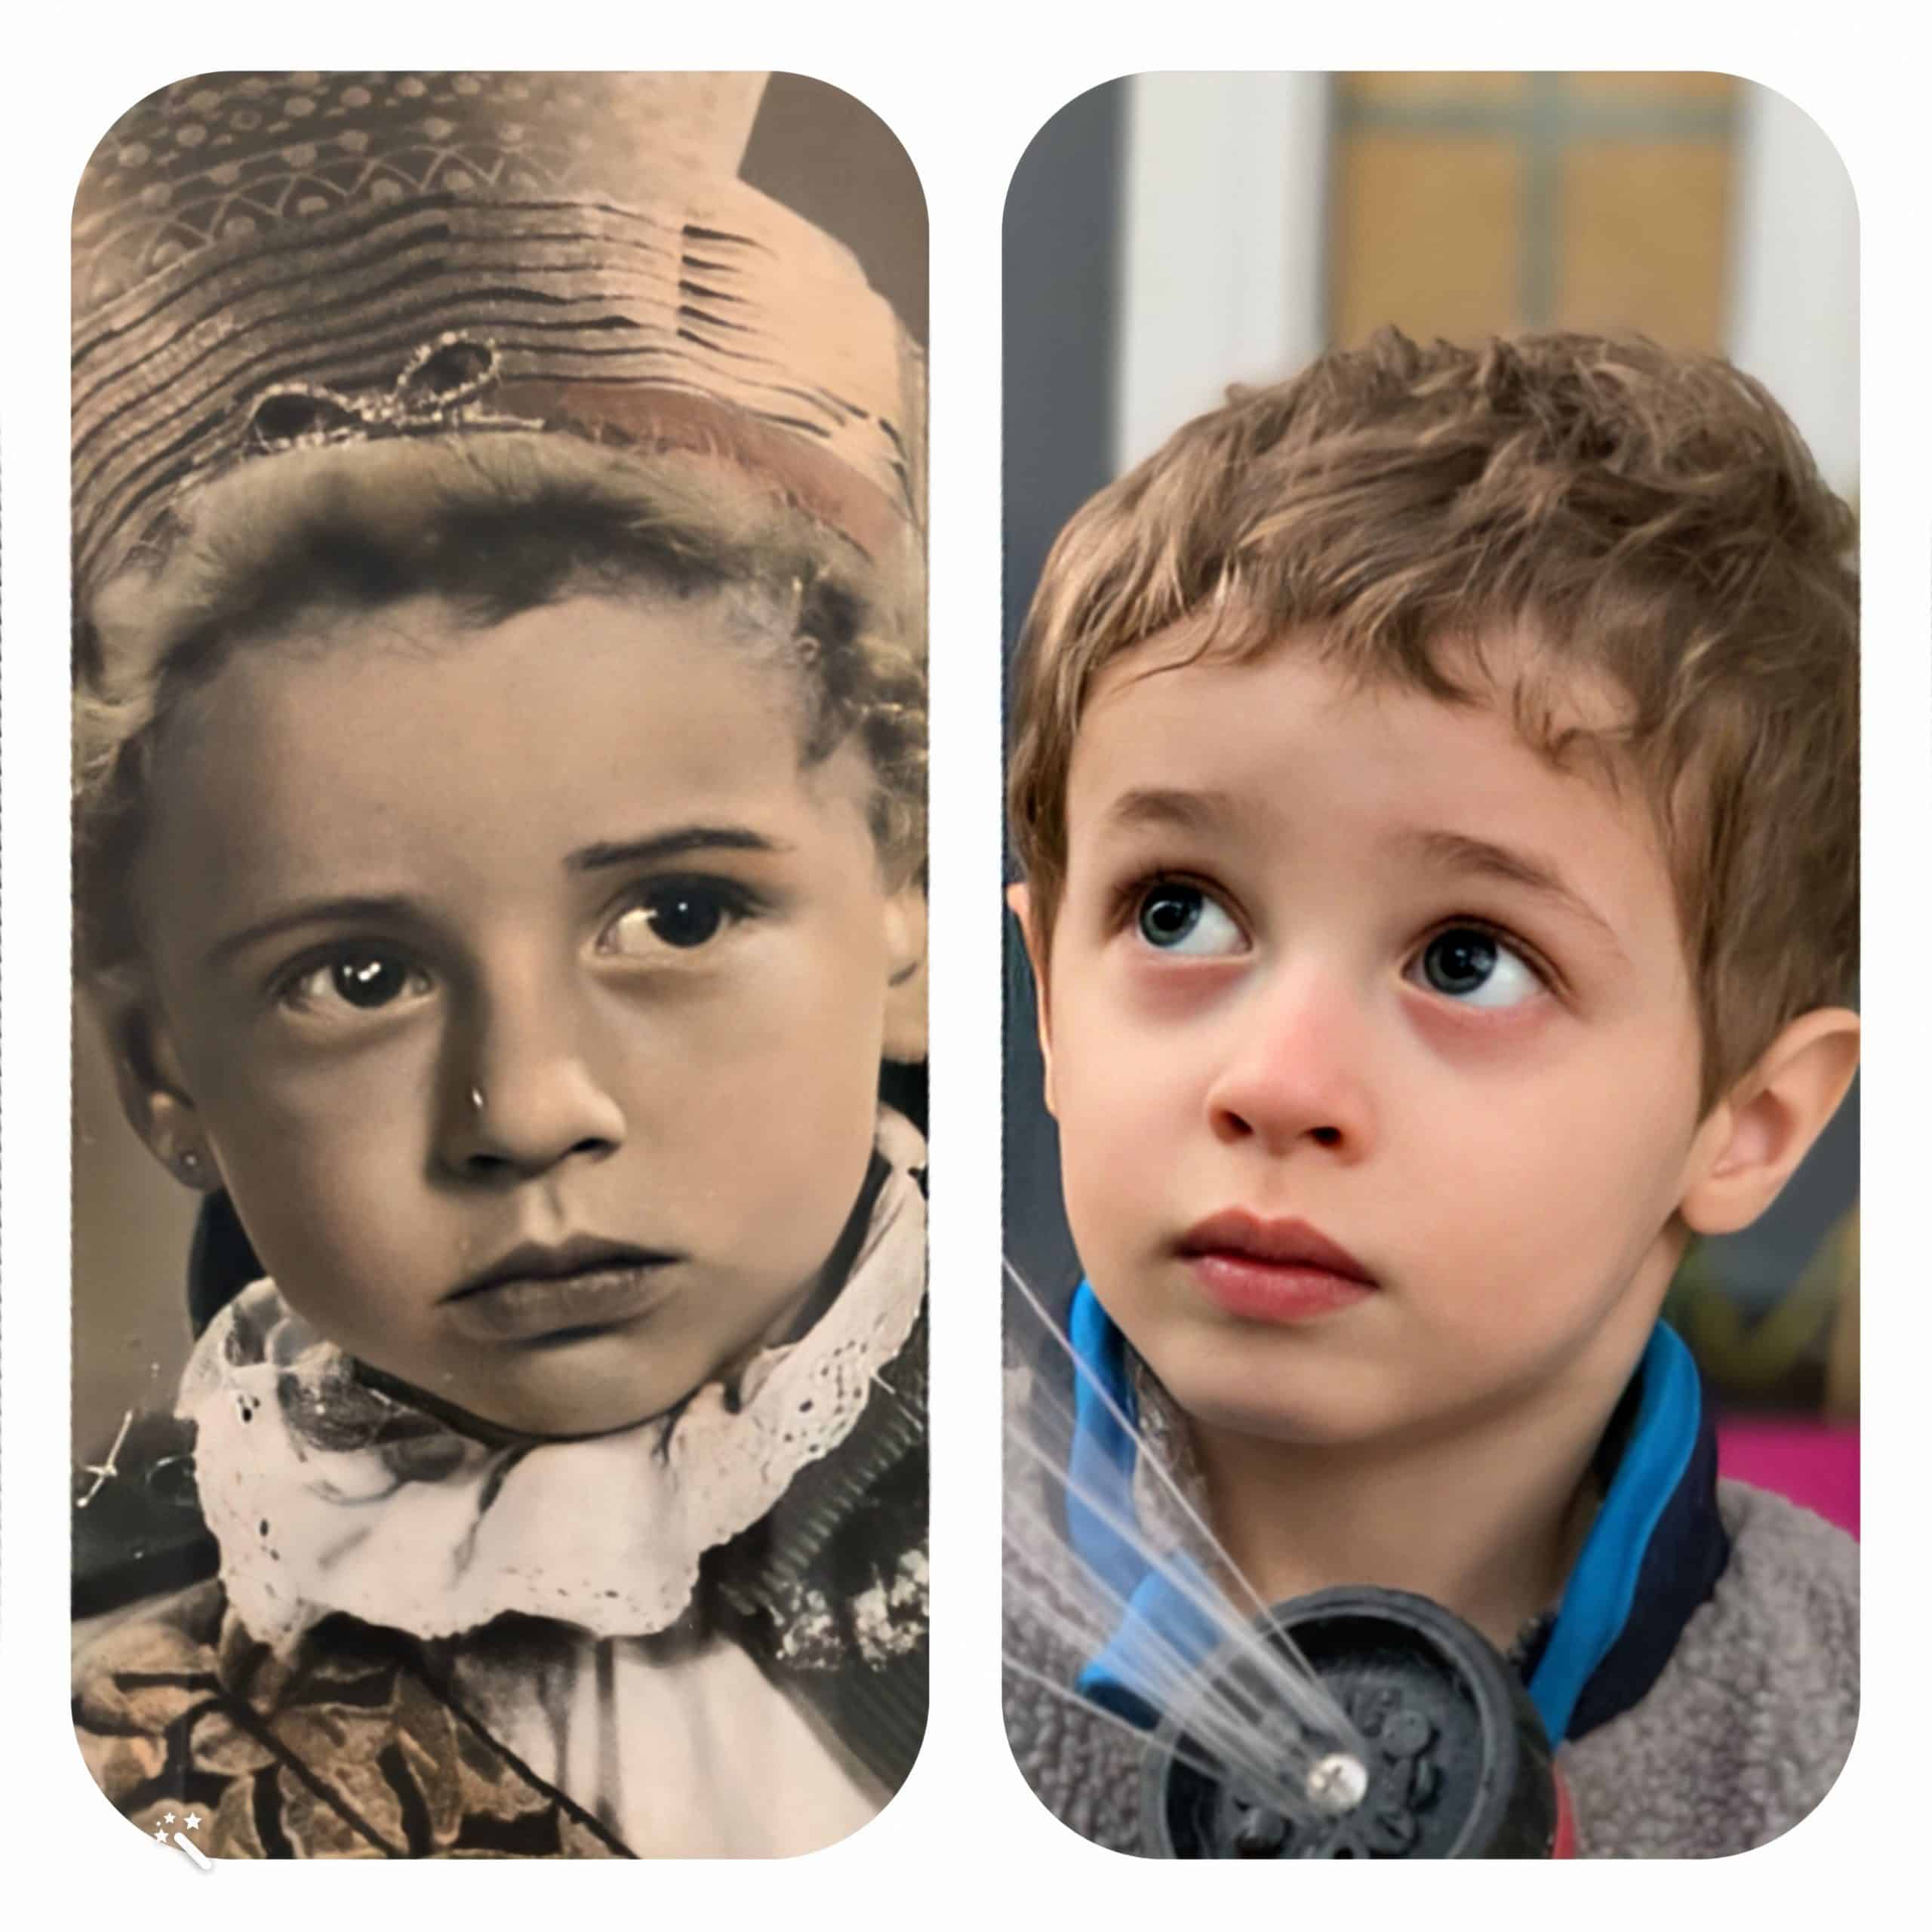 Images of very similar-lookin young boys side by side